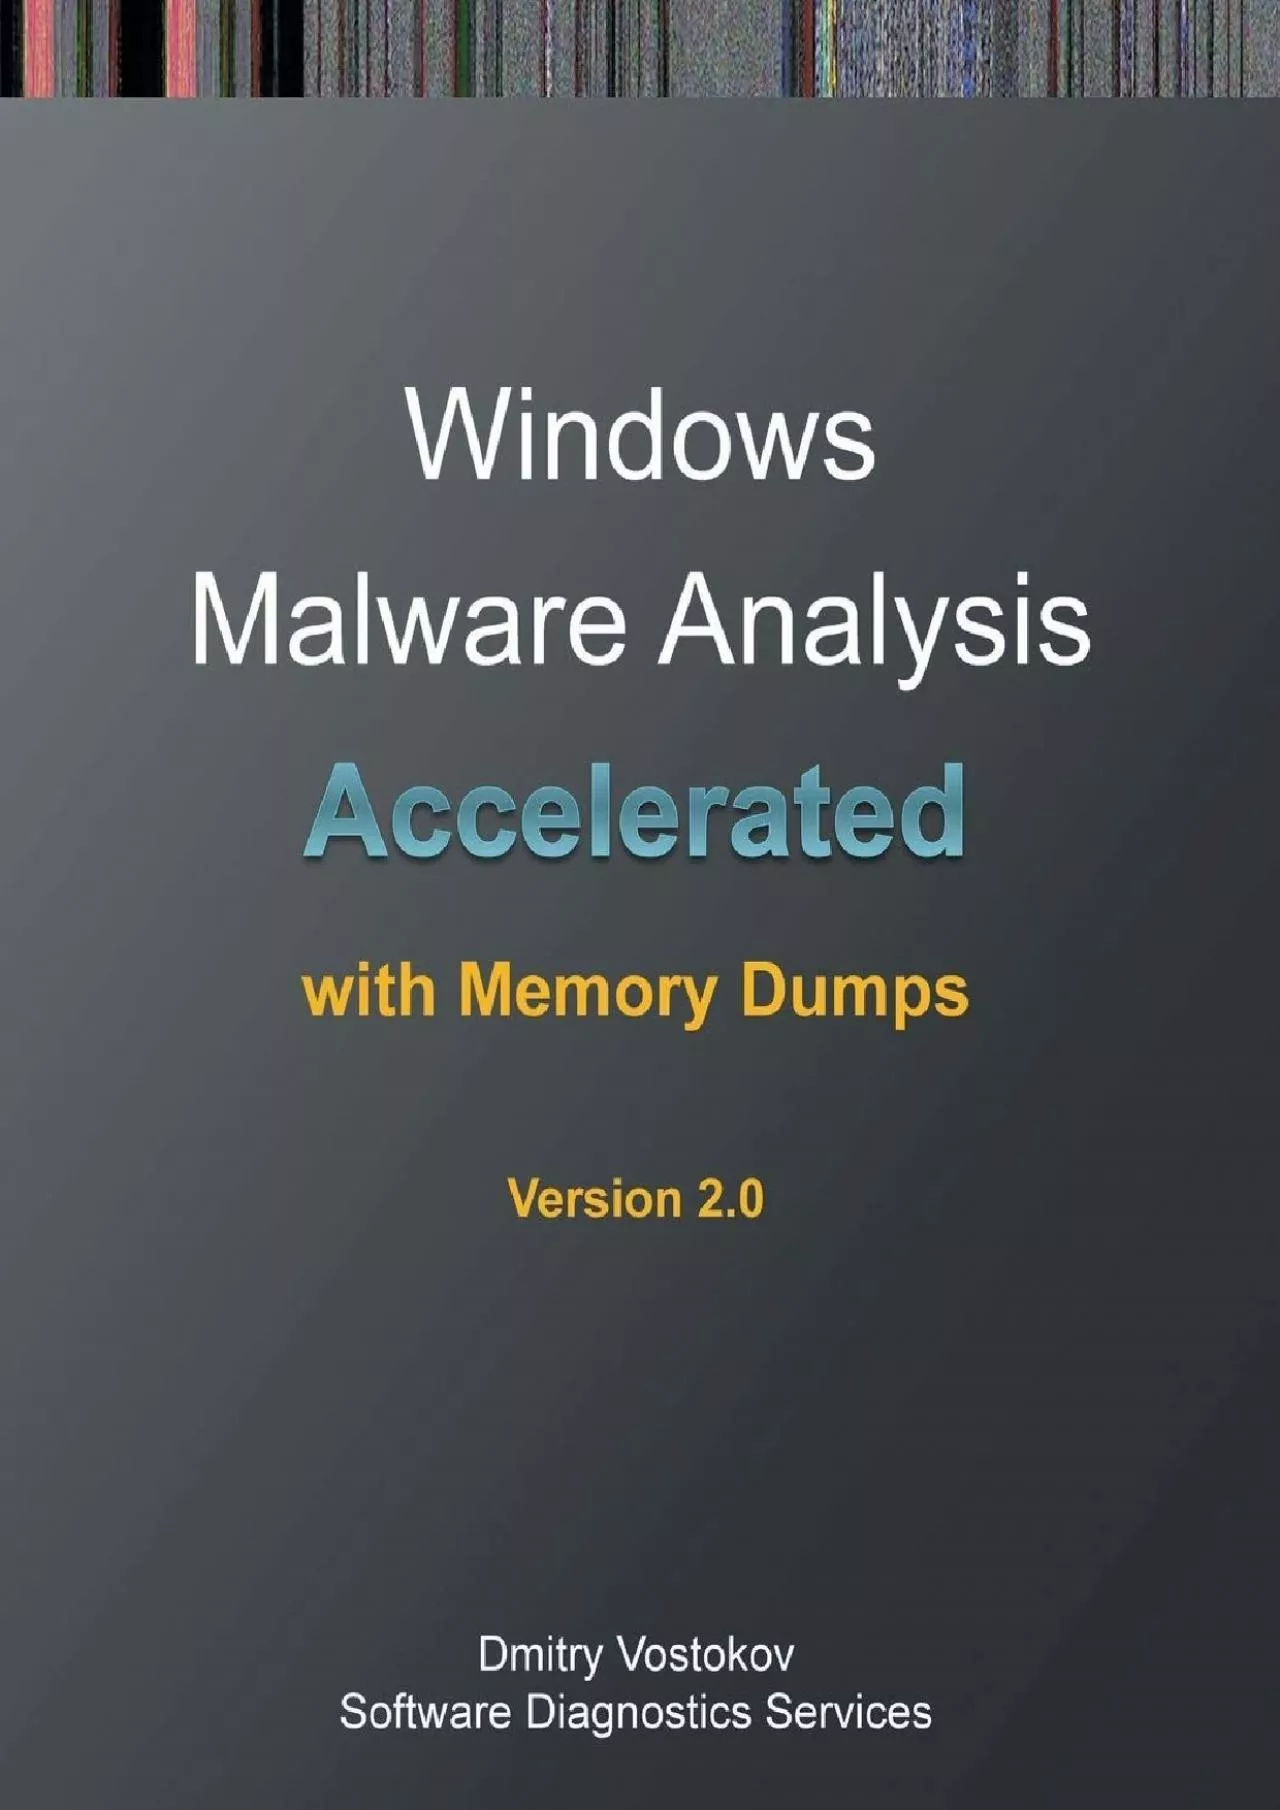 [READING BOOK]-Accelerated Windows Malware Analysis with Memory Dumps: Training Course